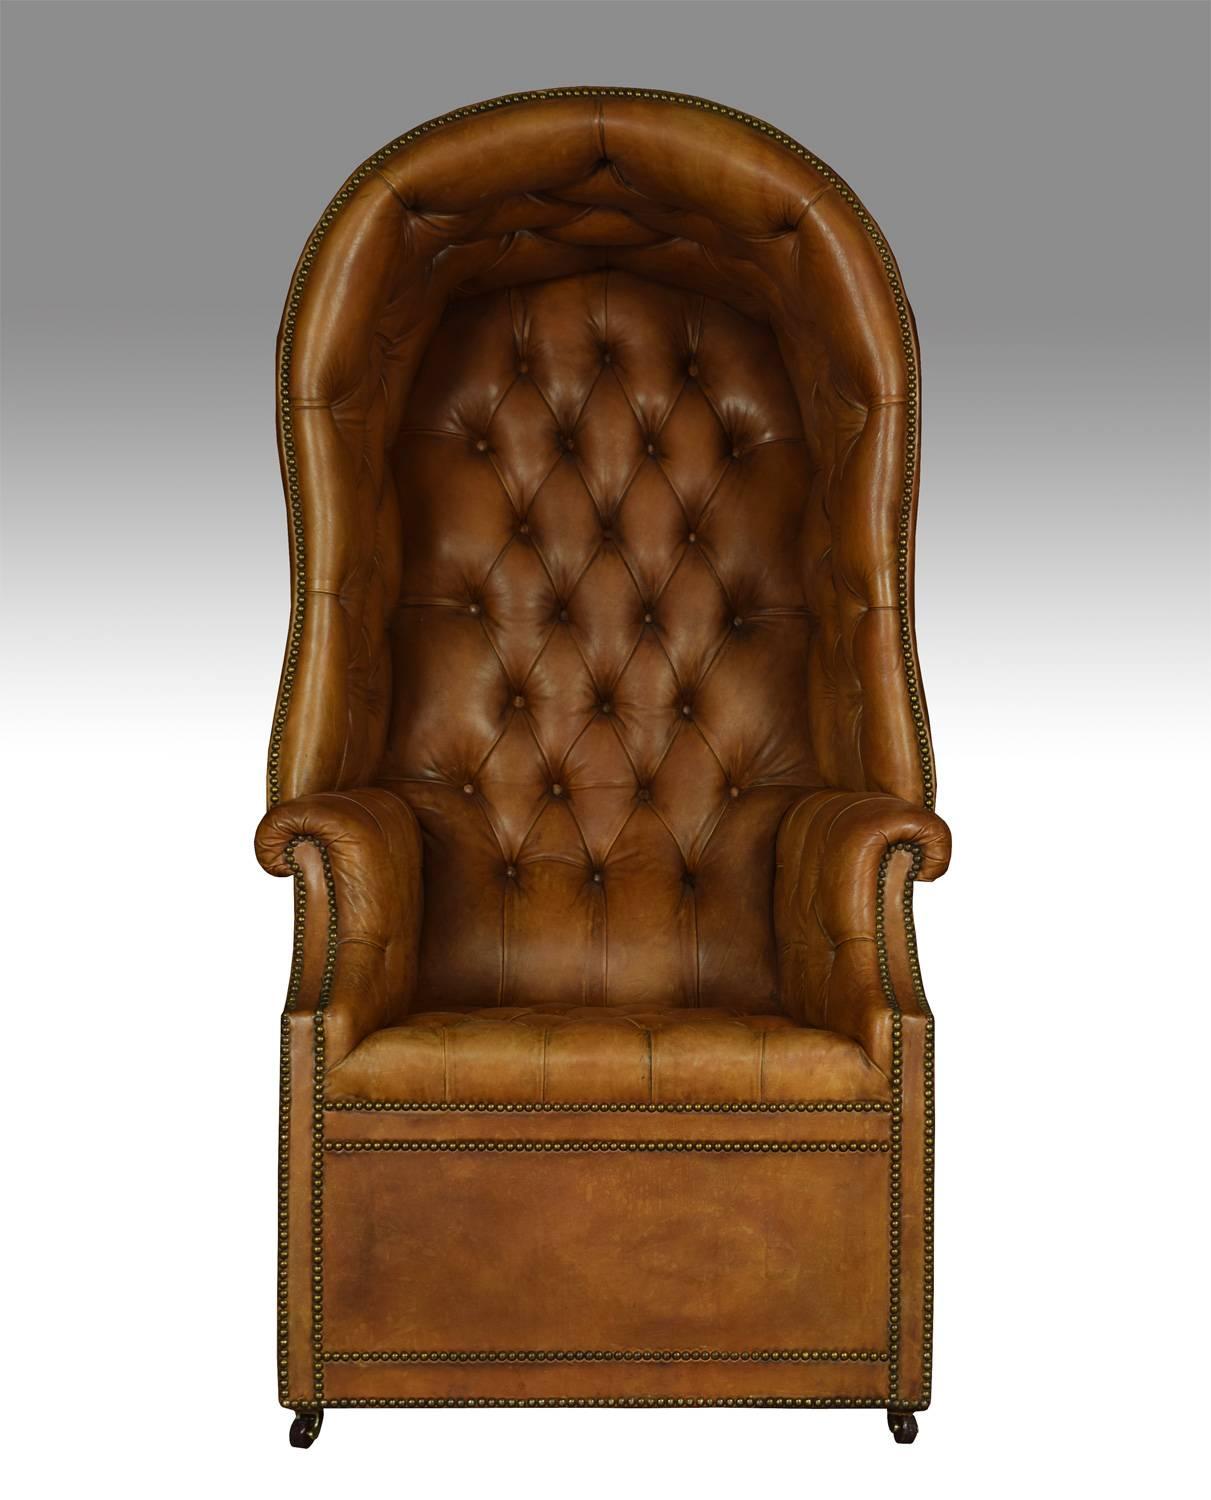 Regency style hall porter’s chair the domed top, back, sides and seat covered in close-nailed brown leather, the back and seat deep buttoned, on castors.

Dimensions
Height 63 inches height to seat 18 inches
Width 32 inches
Depth 33 inches.